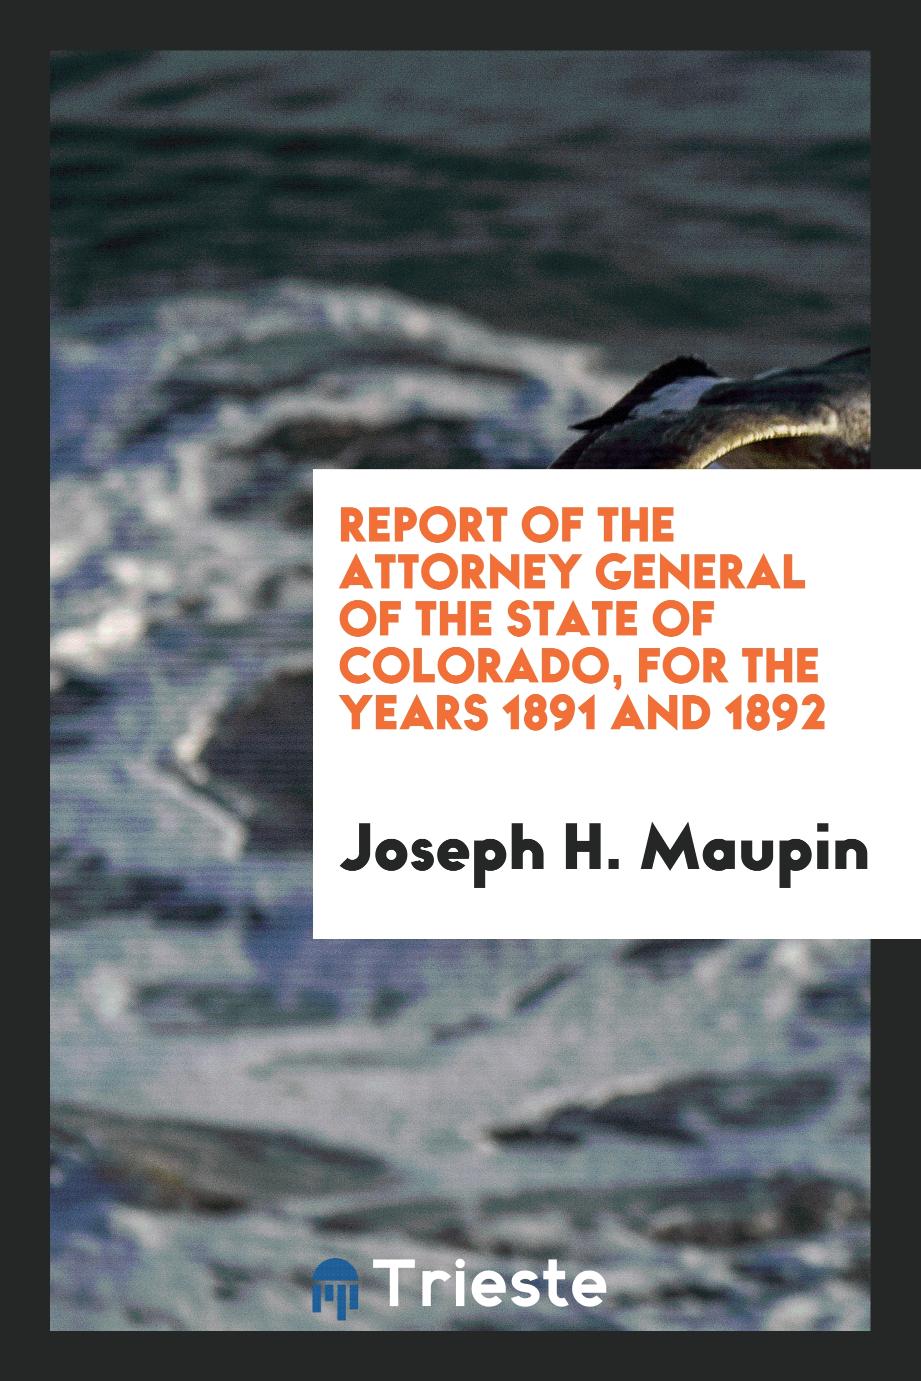 Report of the Attorney General of the State of Colorado, for the Years 1891 and 1892